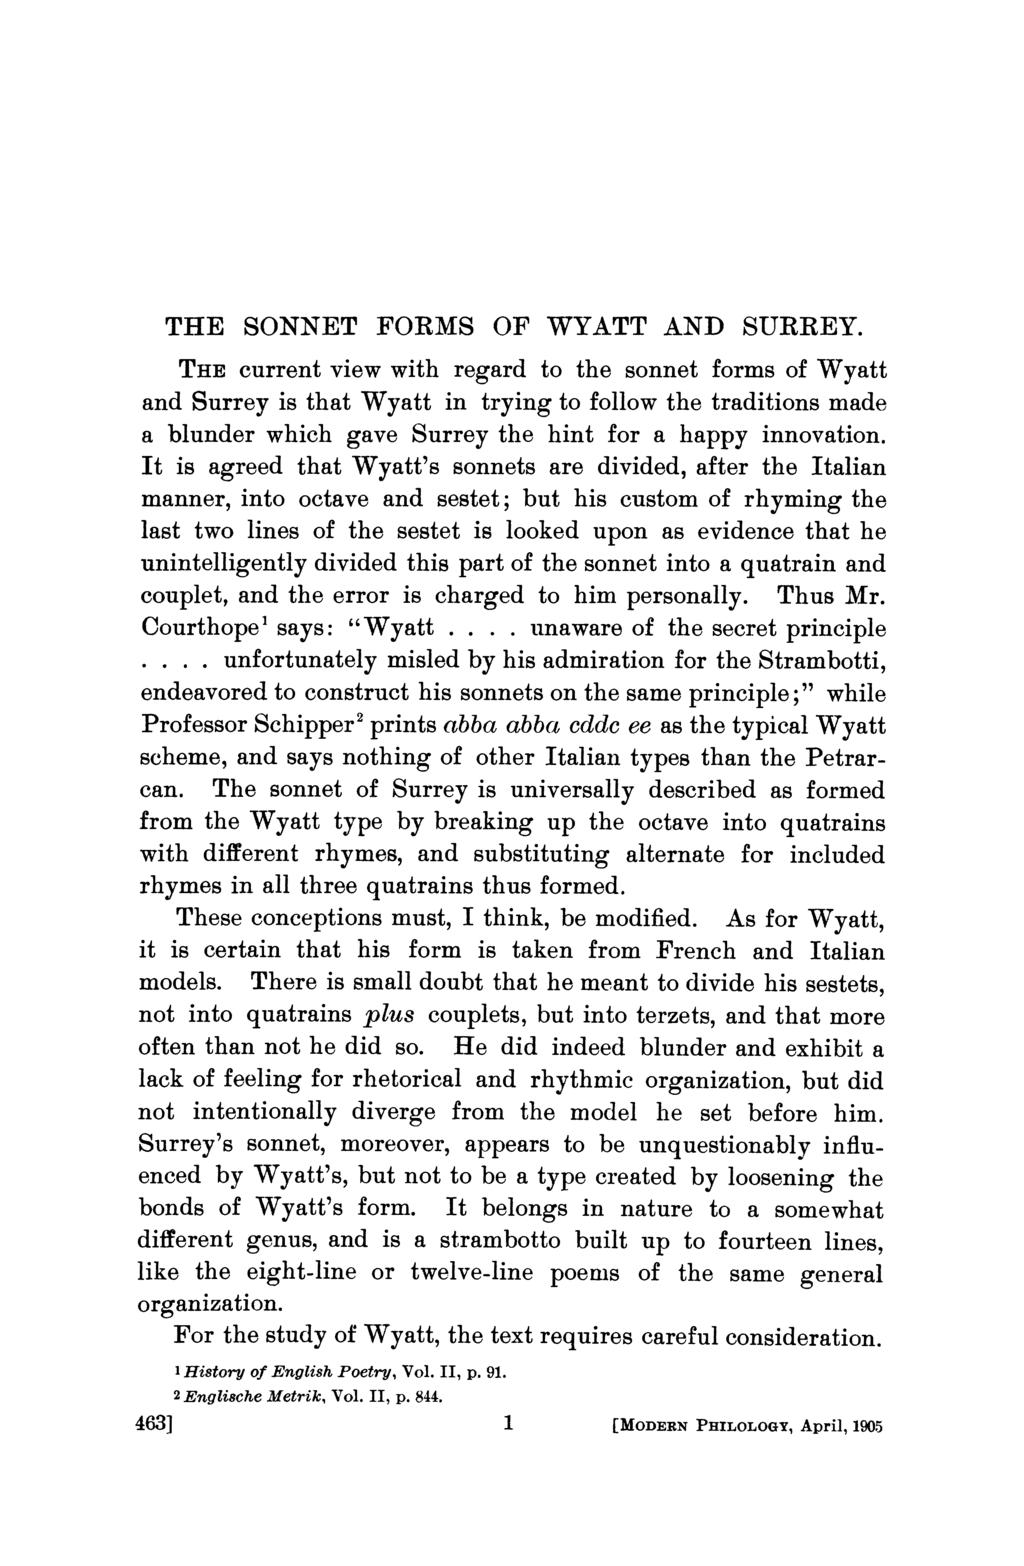 THE SONNET FORMS OF WYATT AND SURREY.